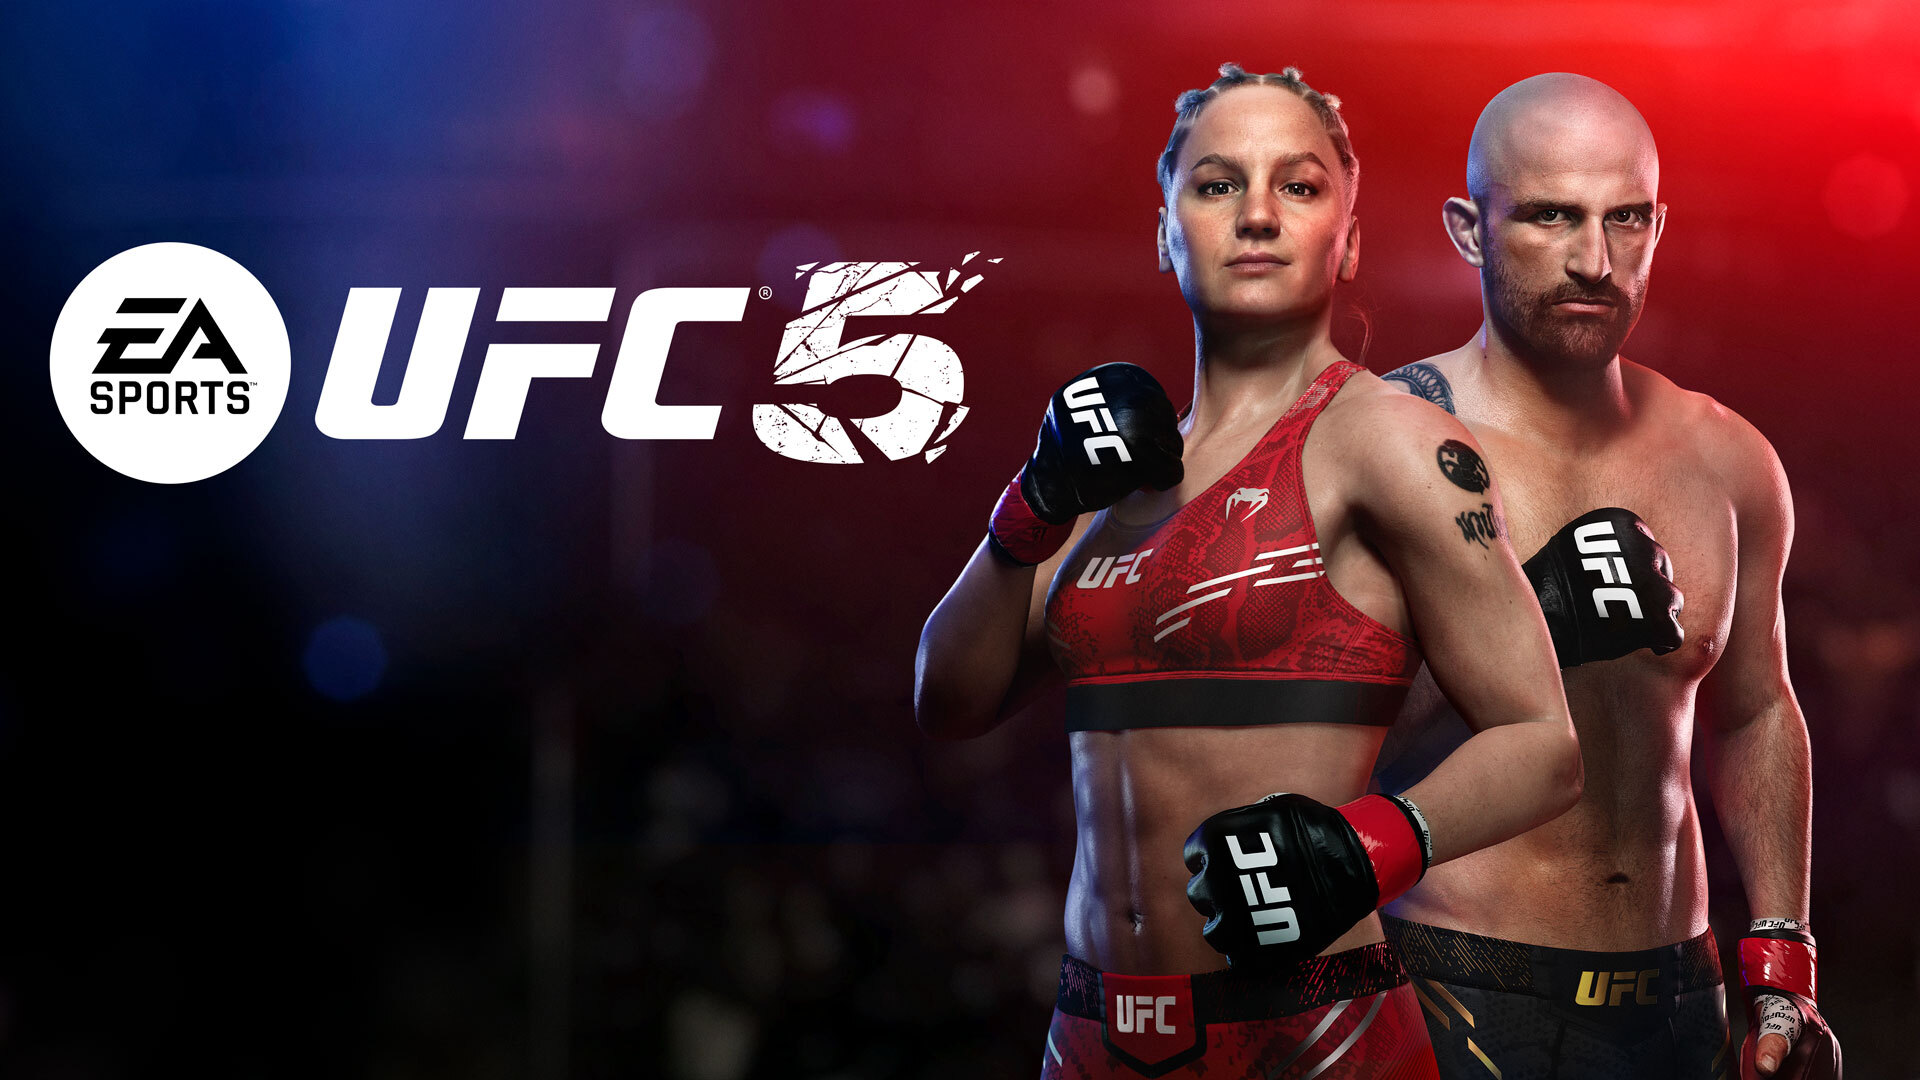 EA UFC 5 Is Out In October, First In Franchise To Use Frostbite - GameSpot